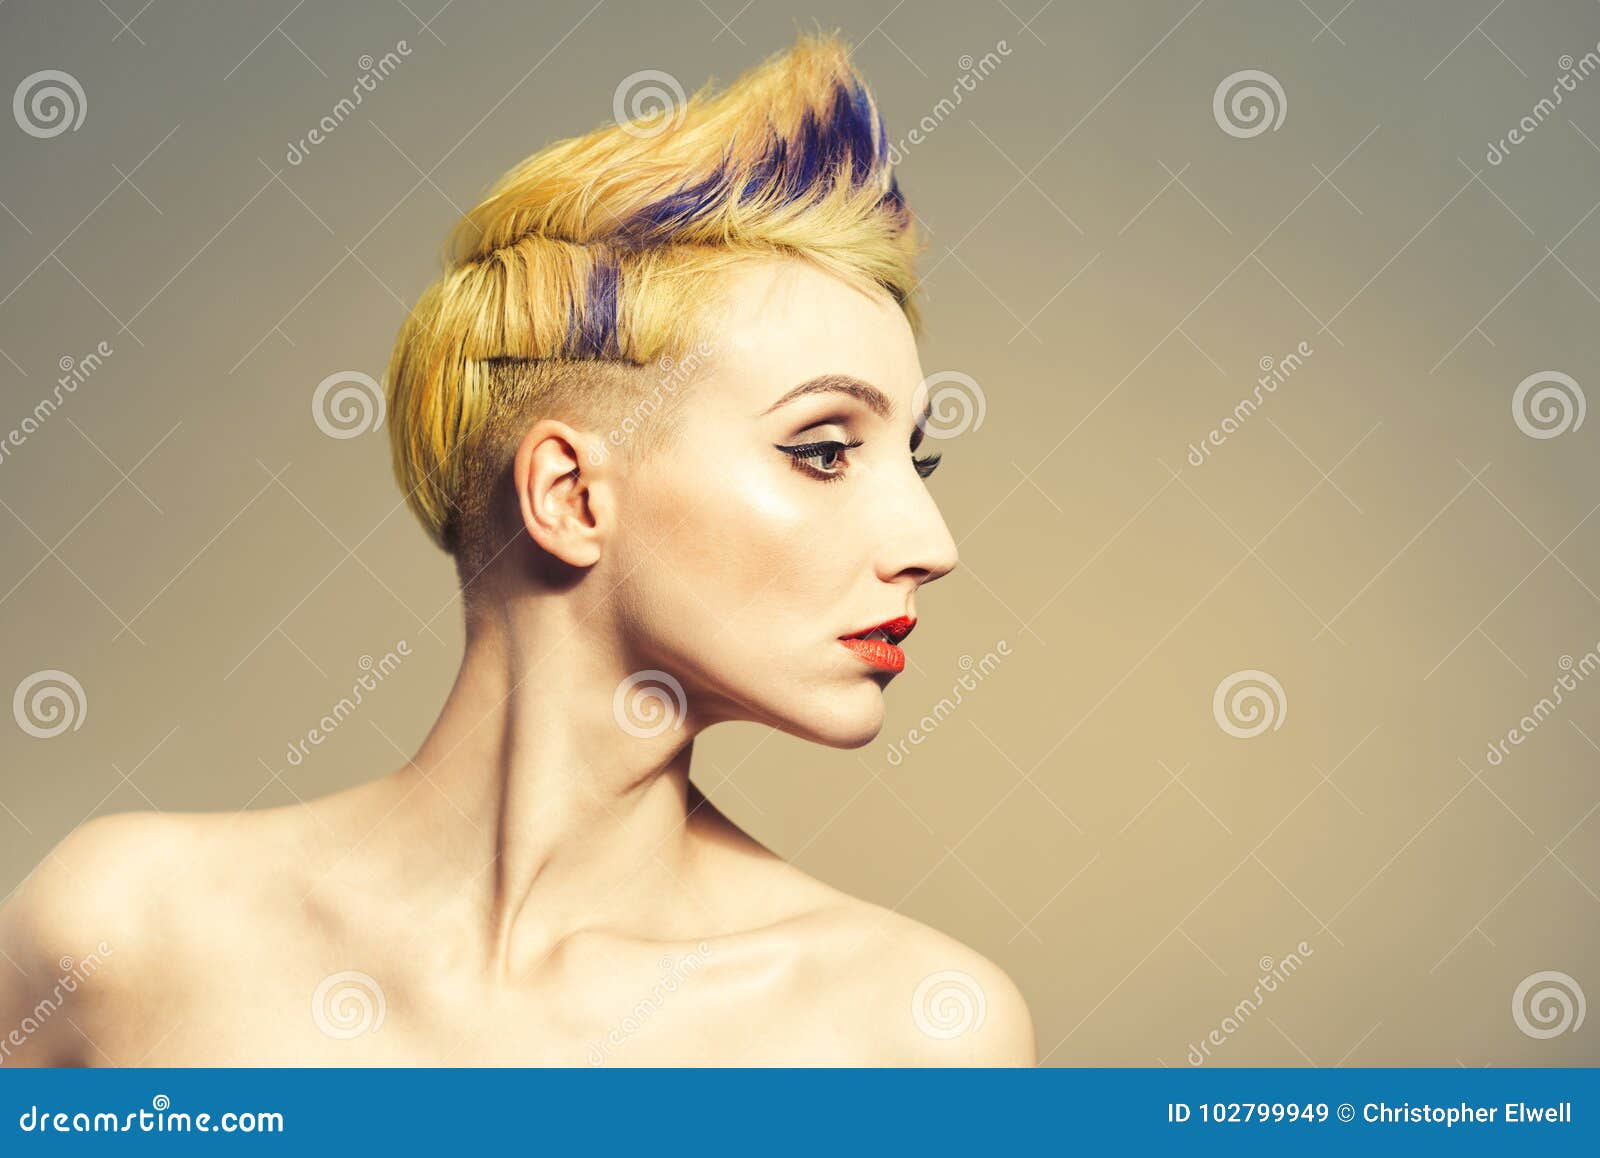 Woman With Funky Hairstyle Stock Image Image Of Hairstyle